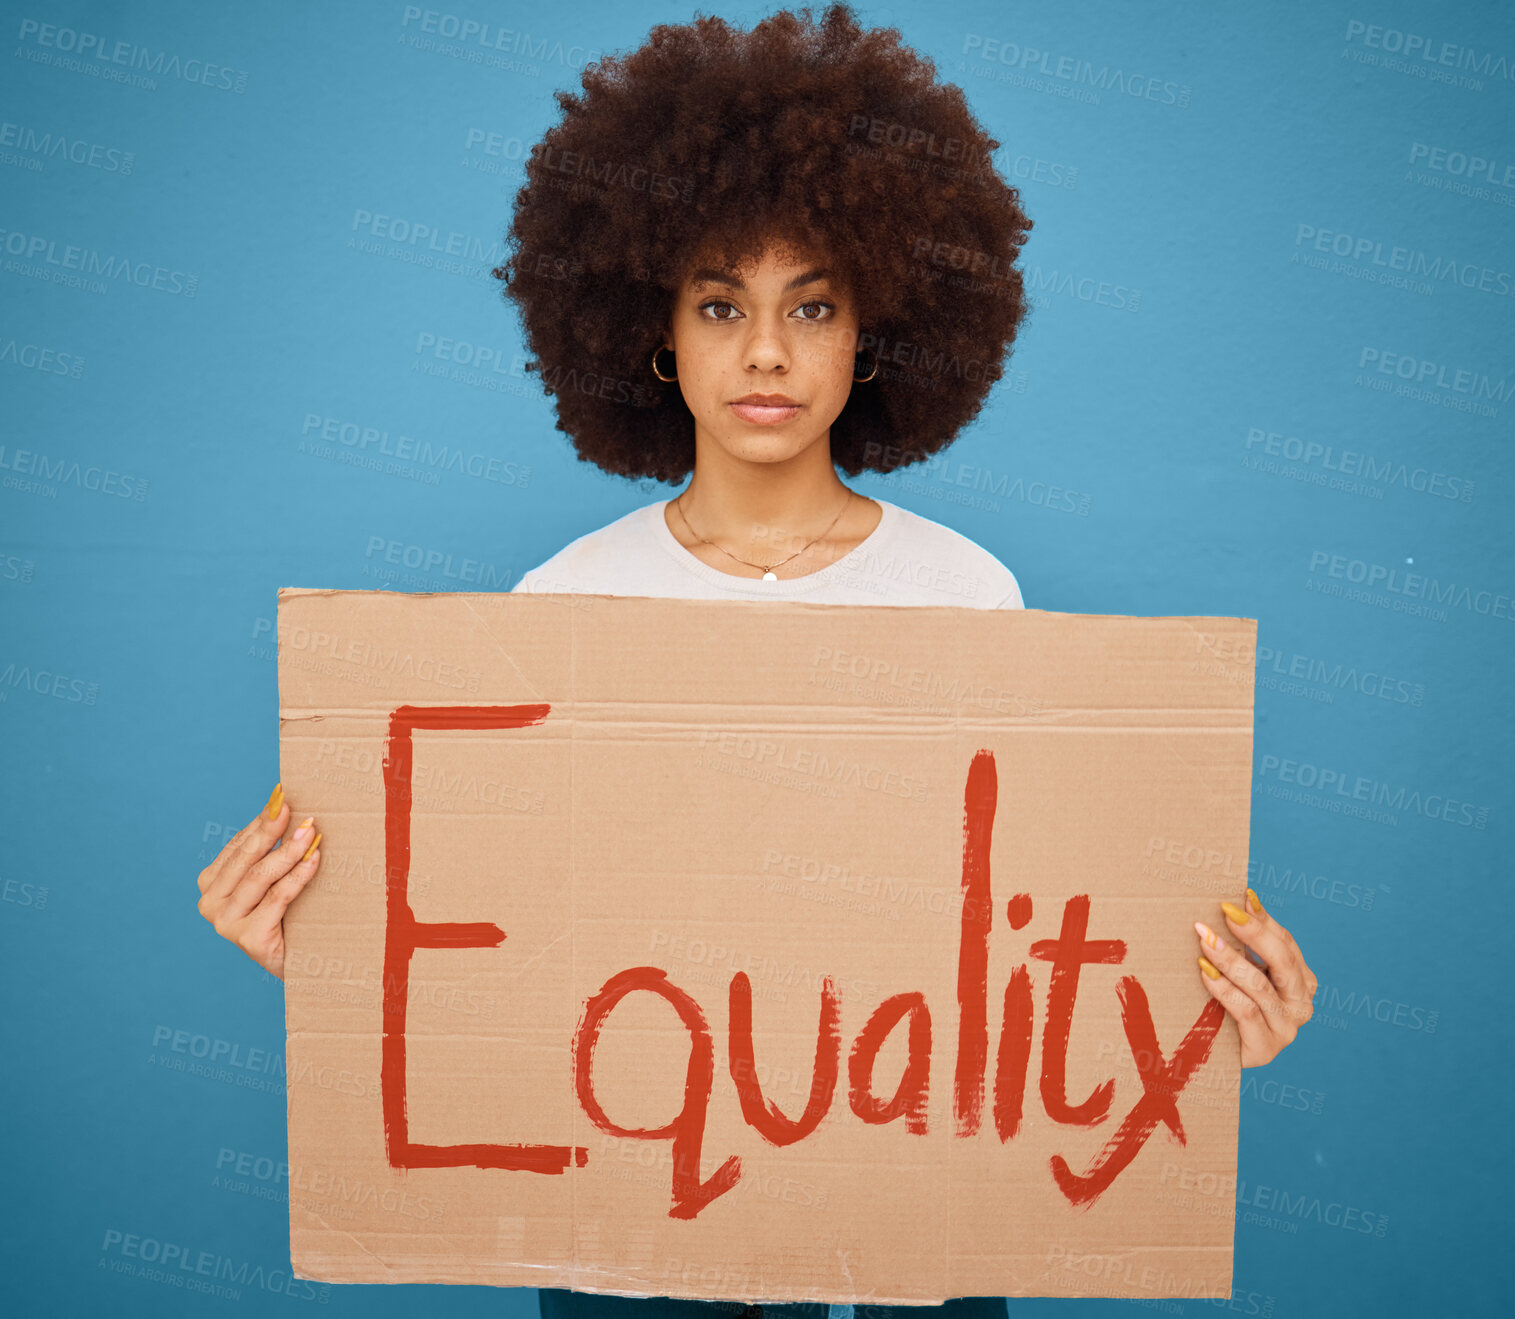 Buy stock photo Equality, protest banner and black woman in studio holding sign for empowerment, change and feminism. Equal rights, poster and female protesting for human rights, racial discrimination and freedom.